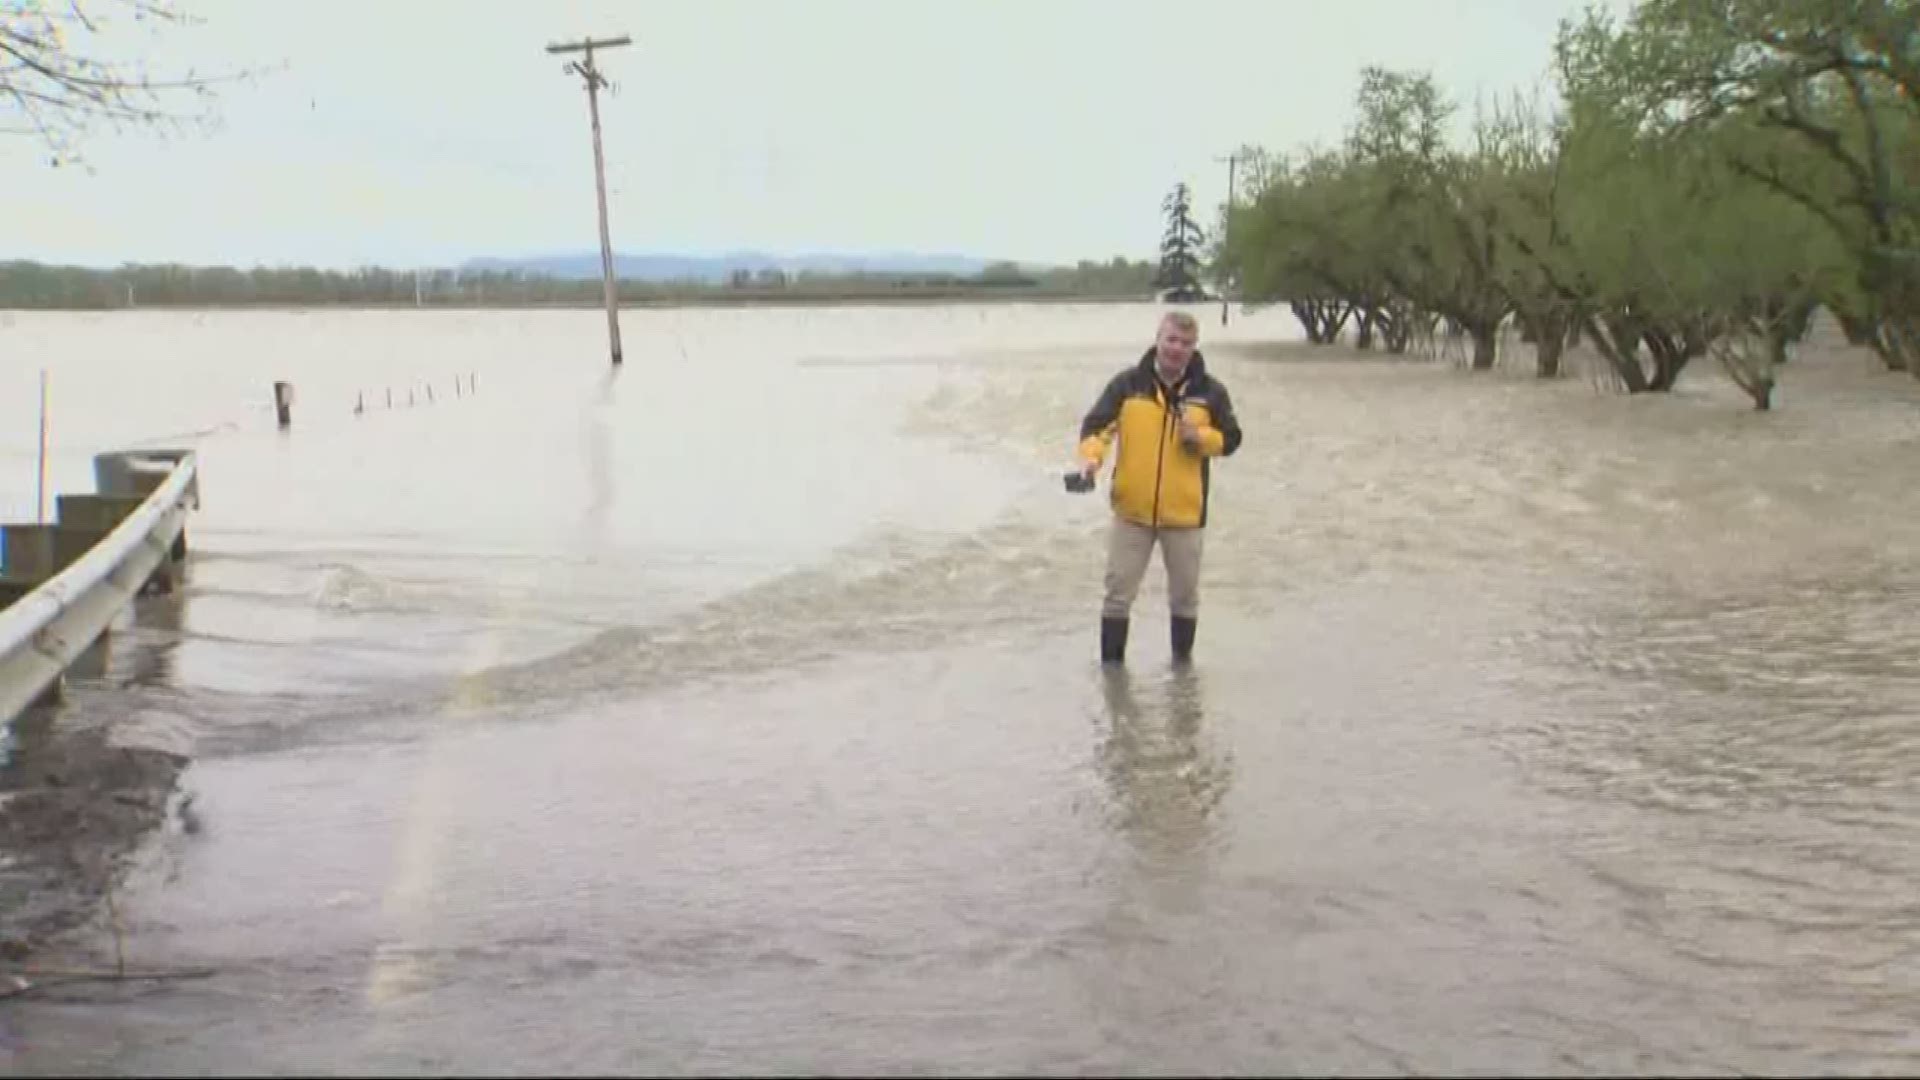 From orchards to a golf course, flood waters have inundated the area.